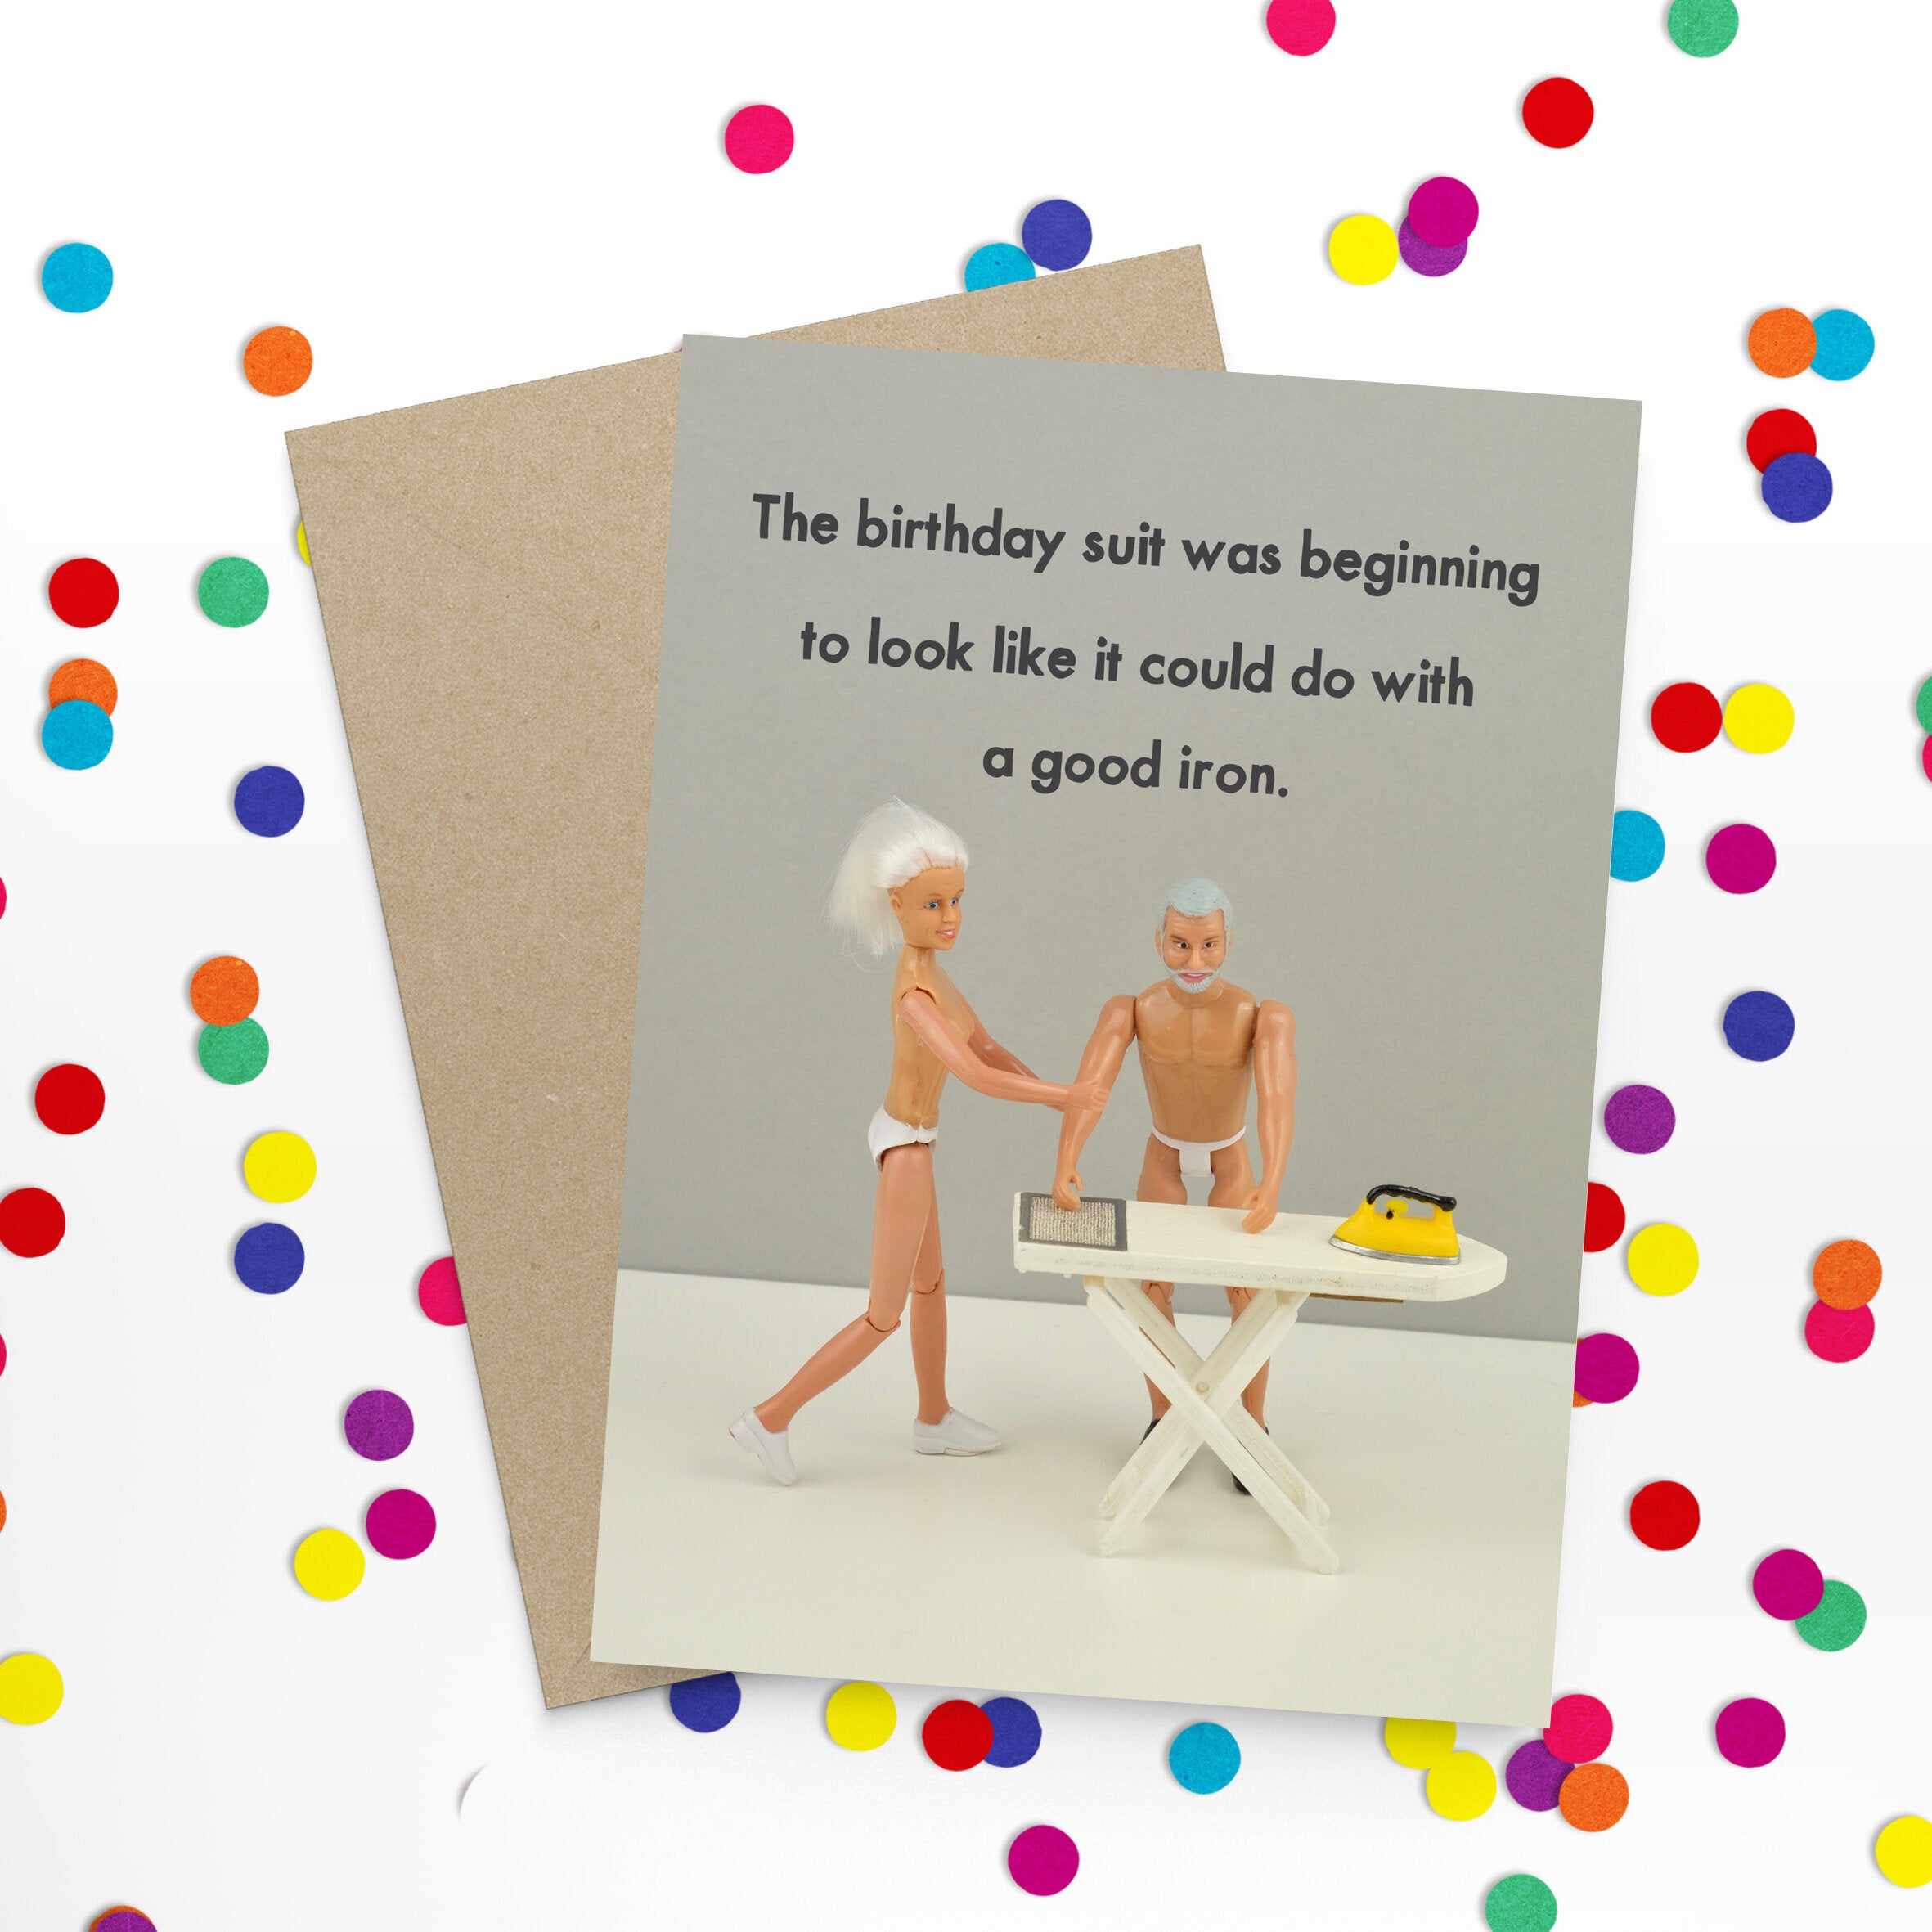 The Birthday Suit Was Beginning To Look Like It Could Do With A Good Iron Greetings Card by Bold and Bright